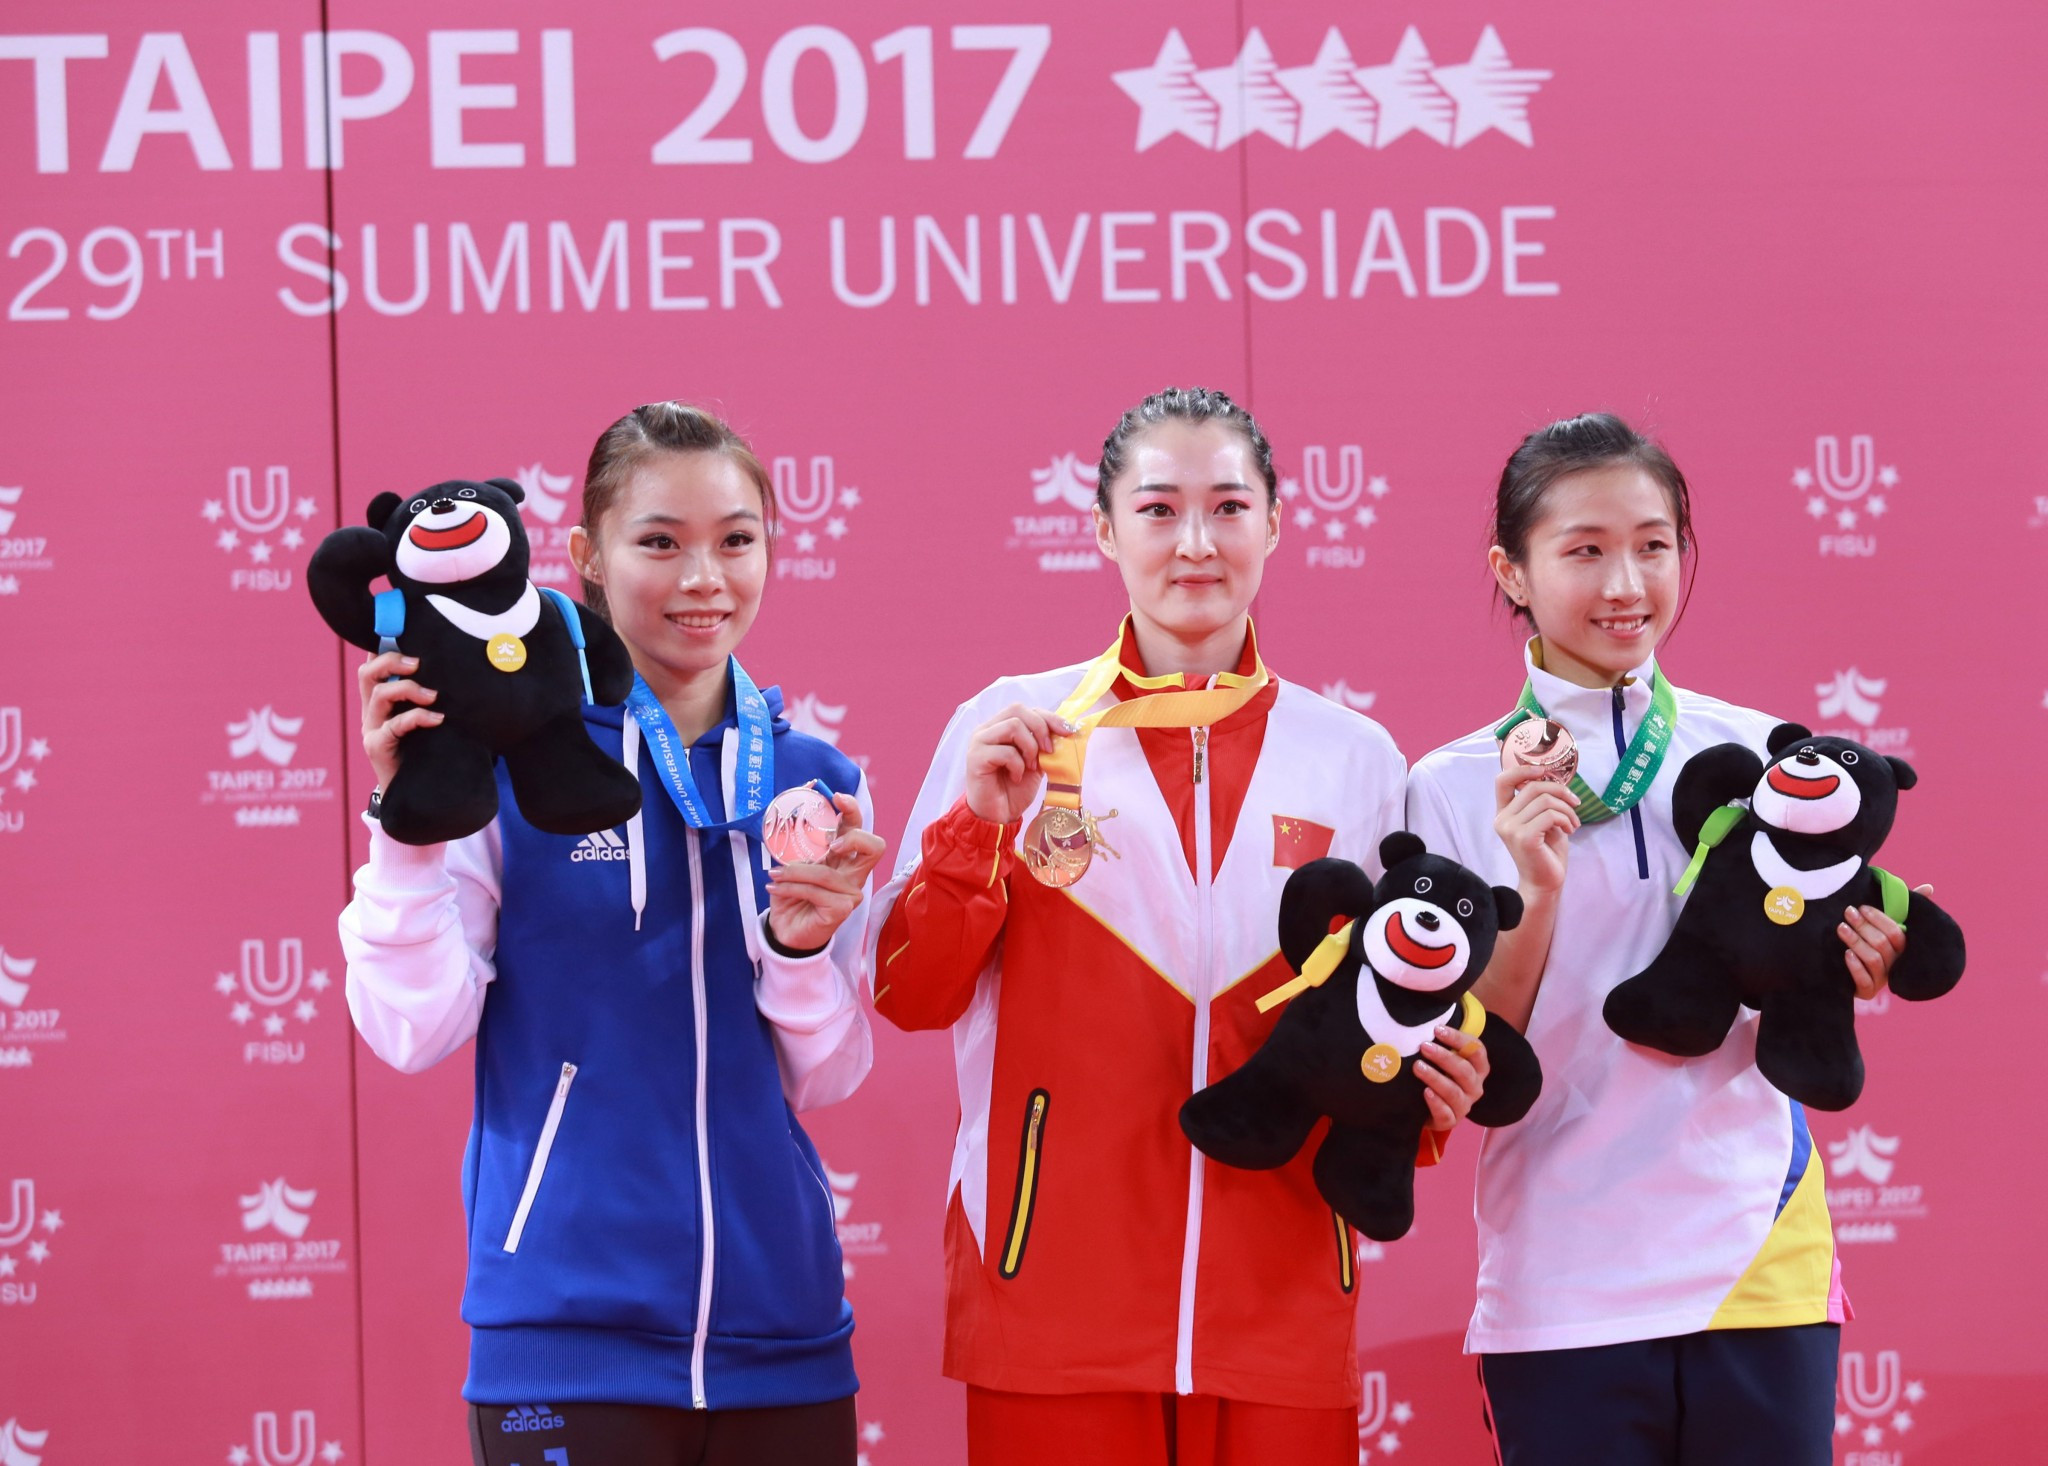 China won the two wushu gold medals on offer ©Taipei 2017